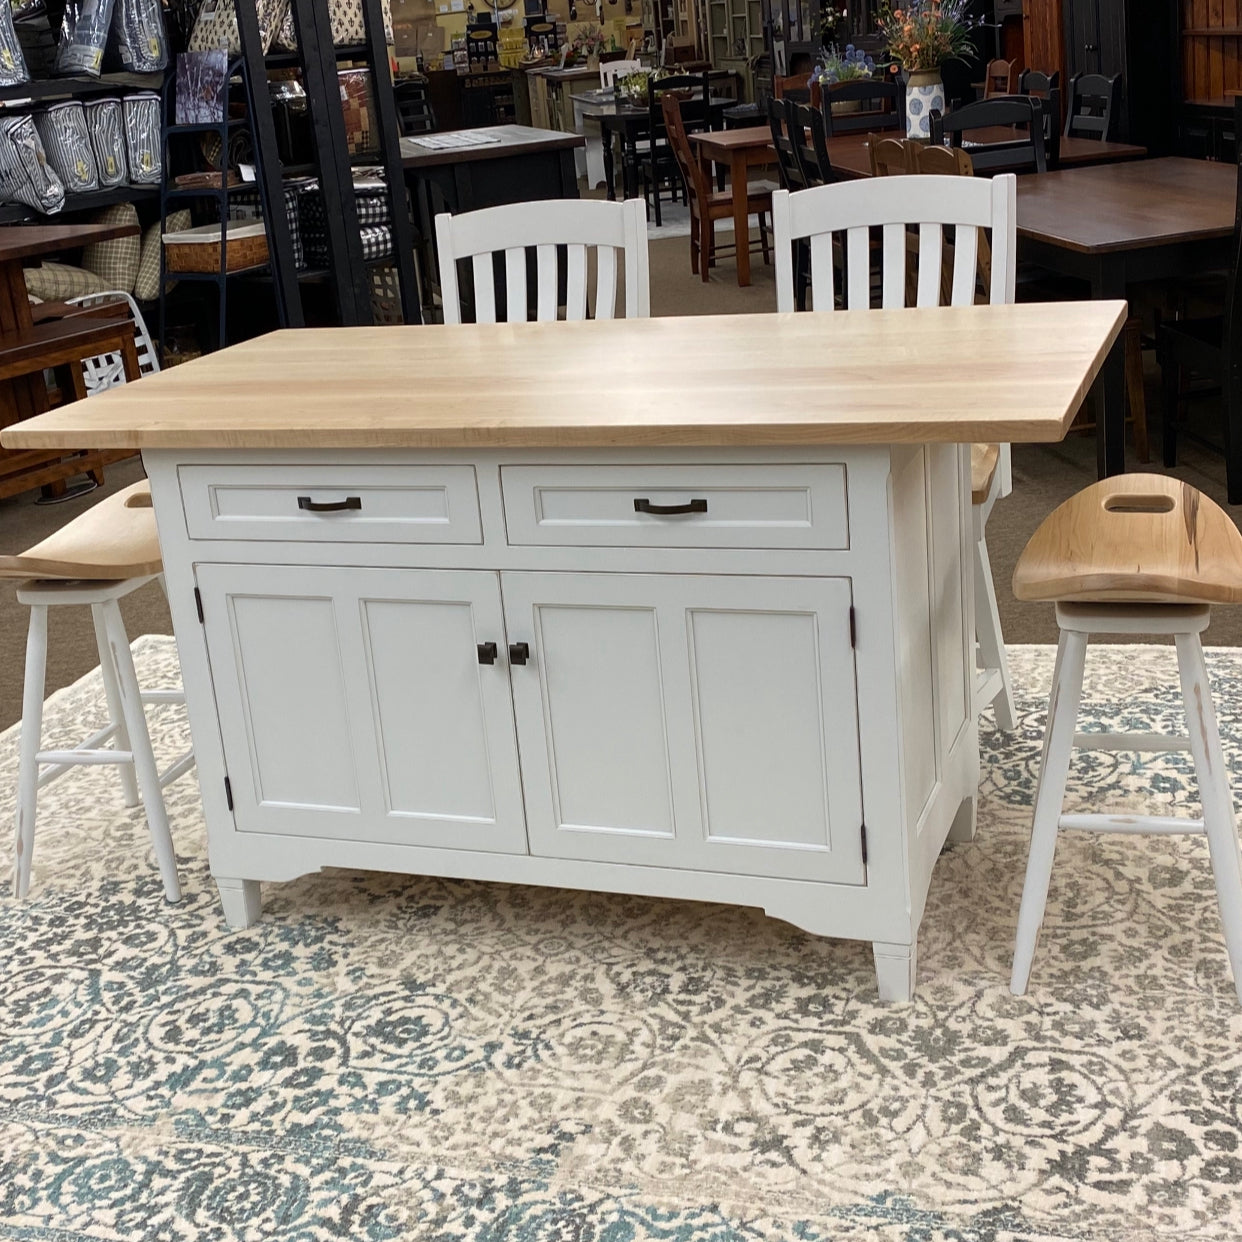 CLEARANCE: Kitchen Island with 2 Stools (Charmworks) - Our Country Hearts